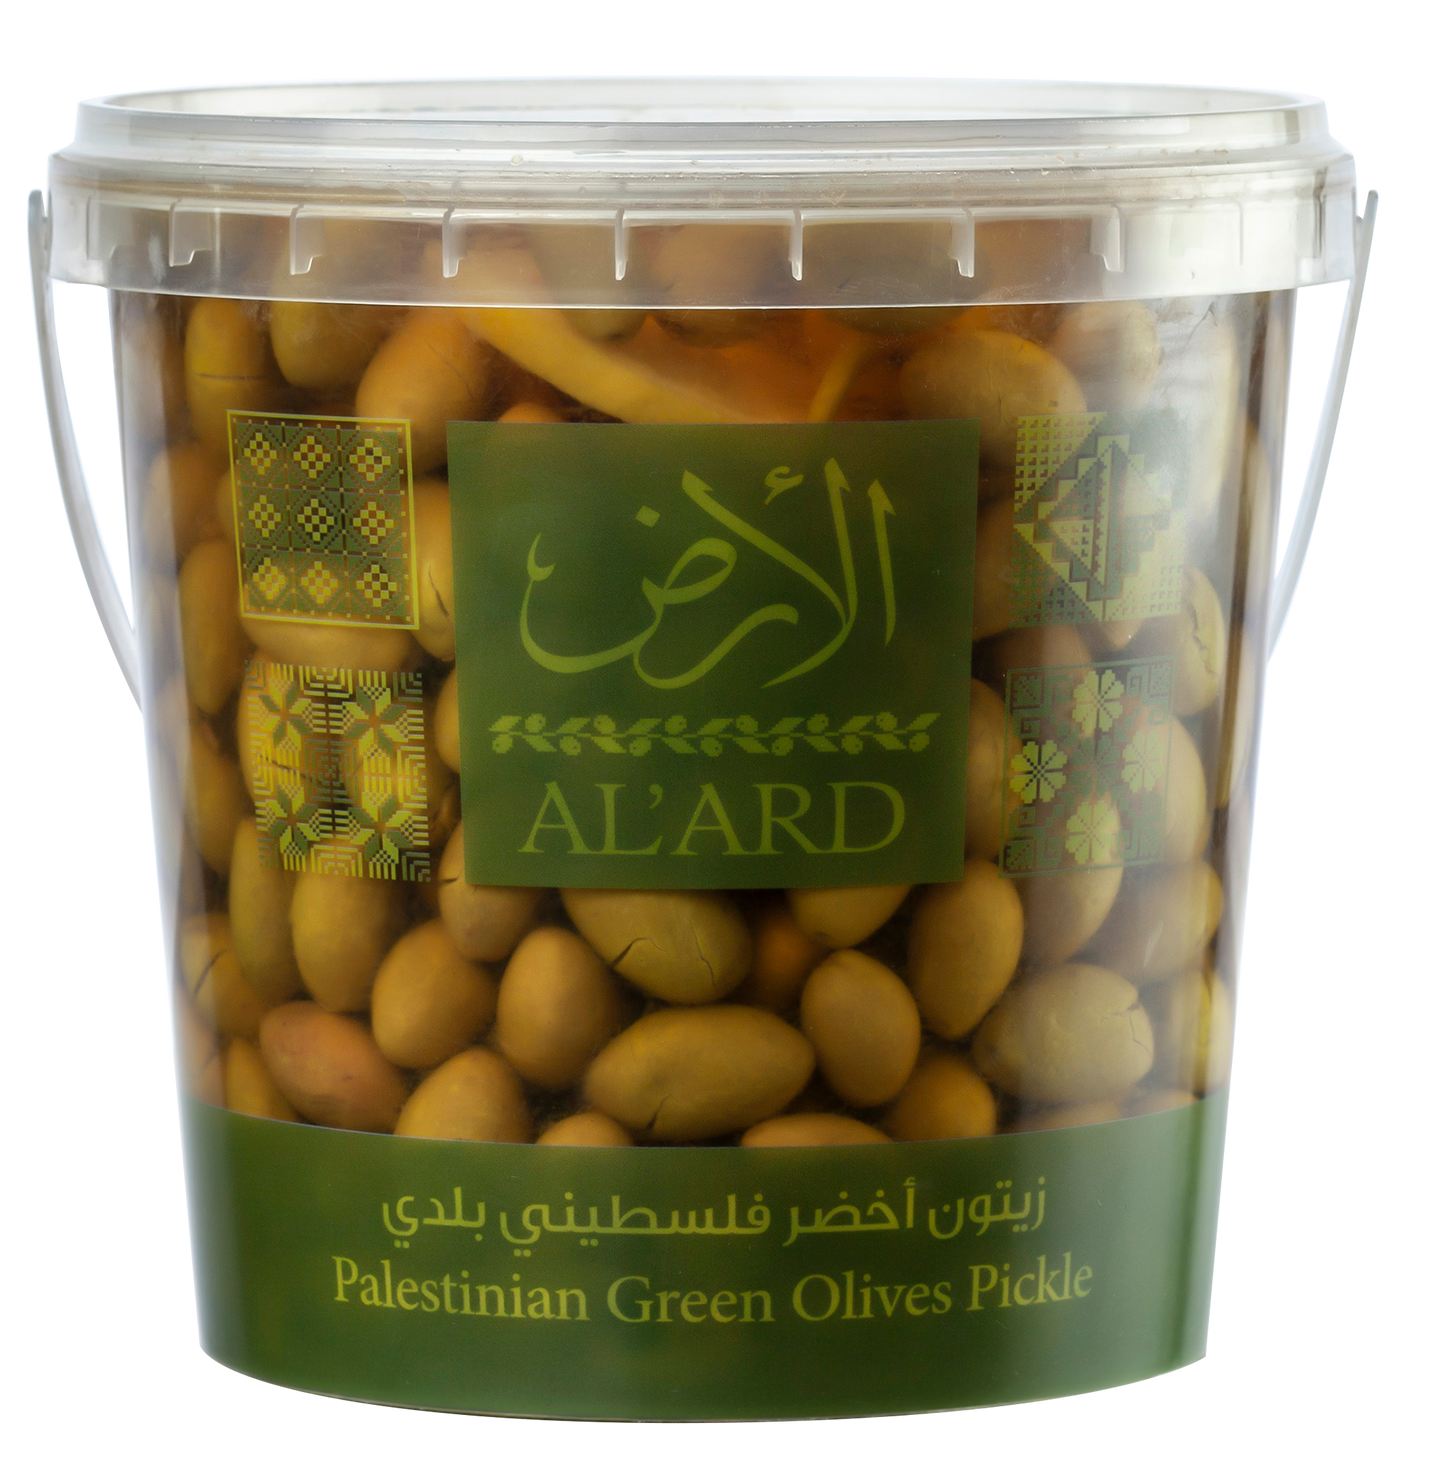 907g my palestinian green olives